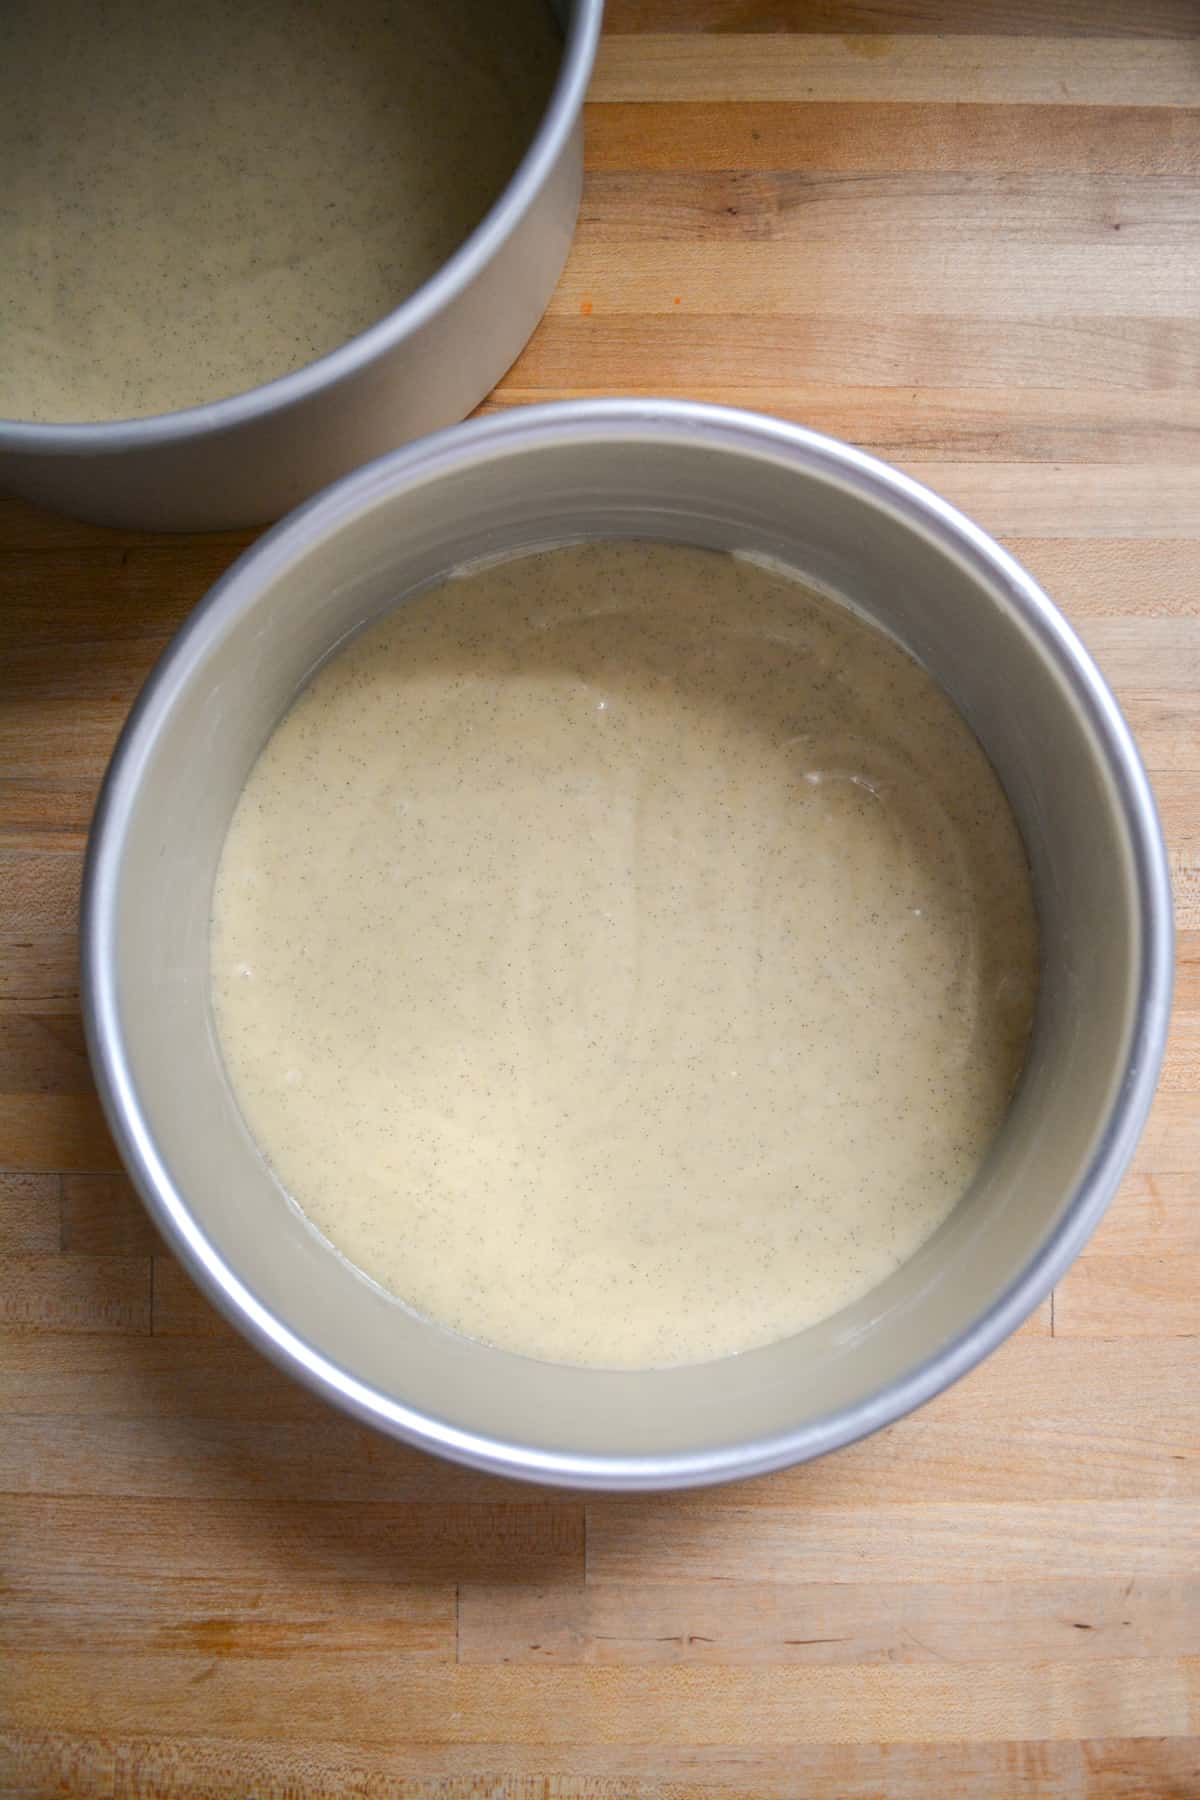 Cake batter portioned out into two eight inch round cake pans.